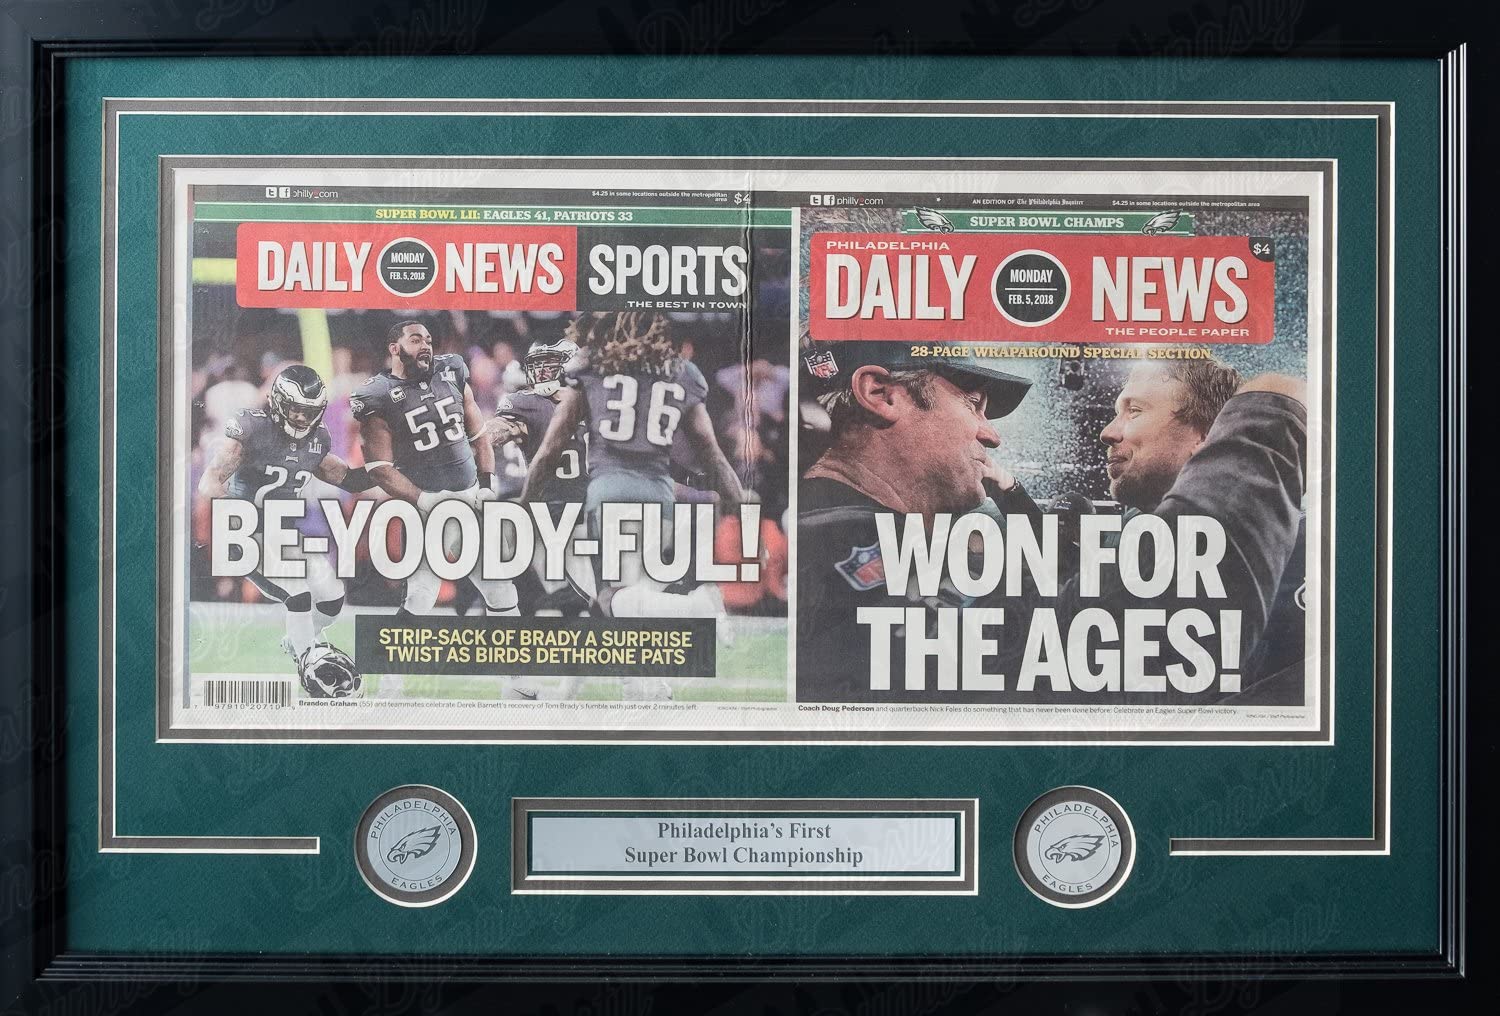 Philadelphia Eagles Super Bowl LII Champions Framed and Matted Daily News Collage - Dynasty Sports & Framing 